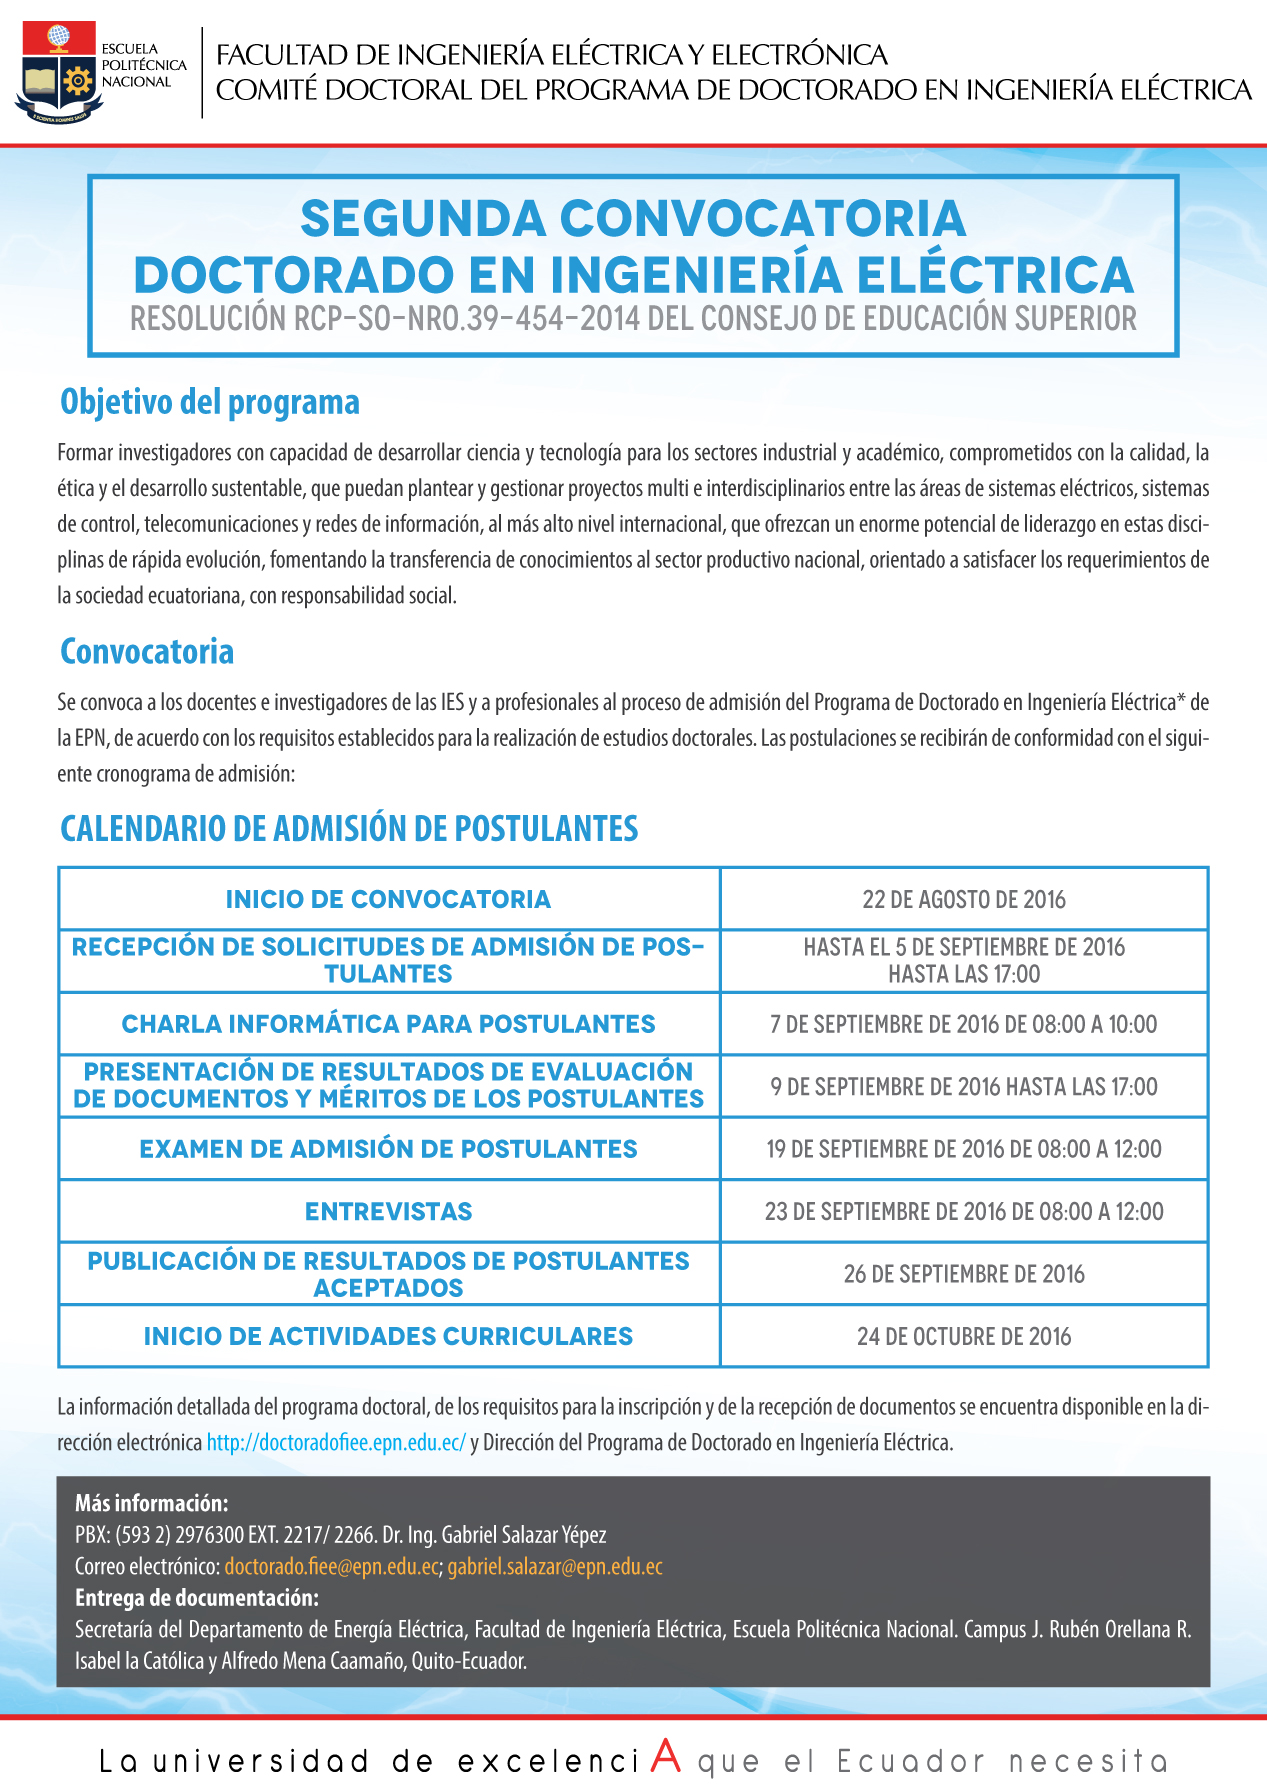 doc_ing_electrica